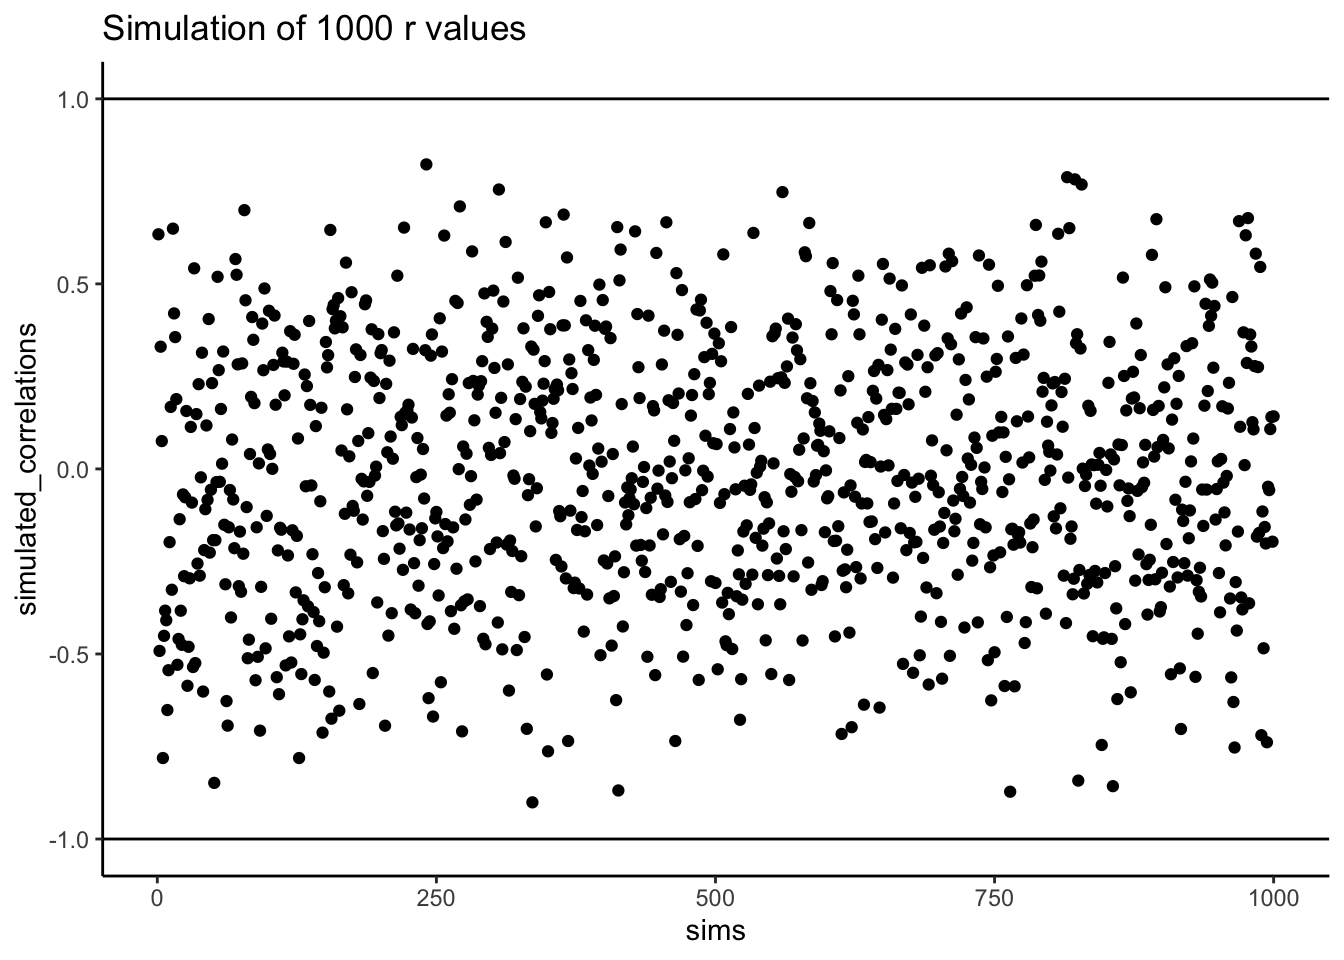 Another figure showing a range of r-values that can be obtained by chance